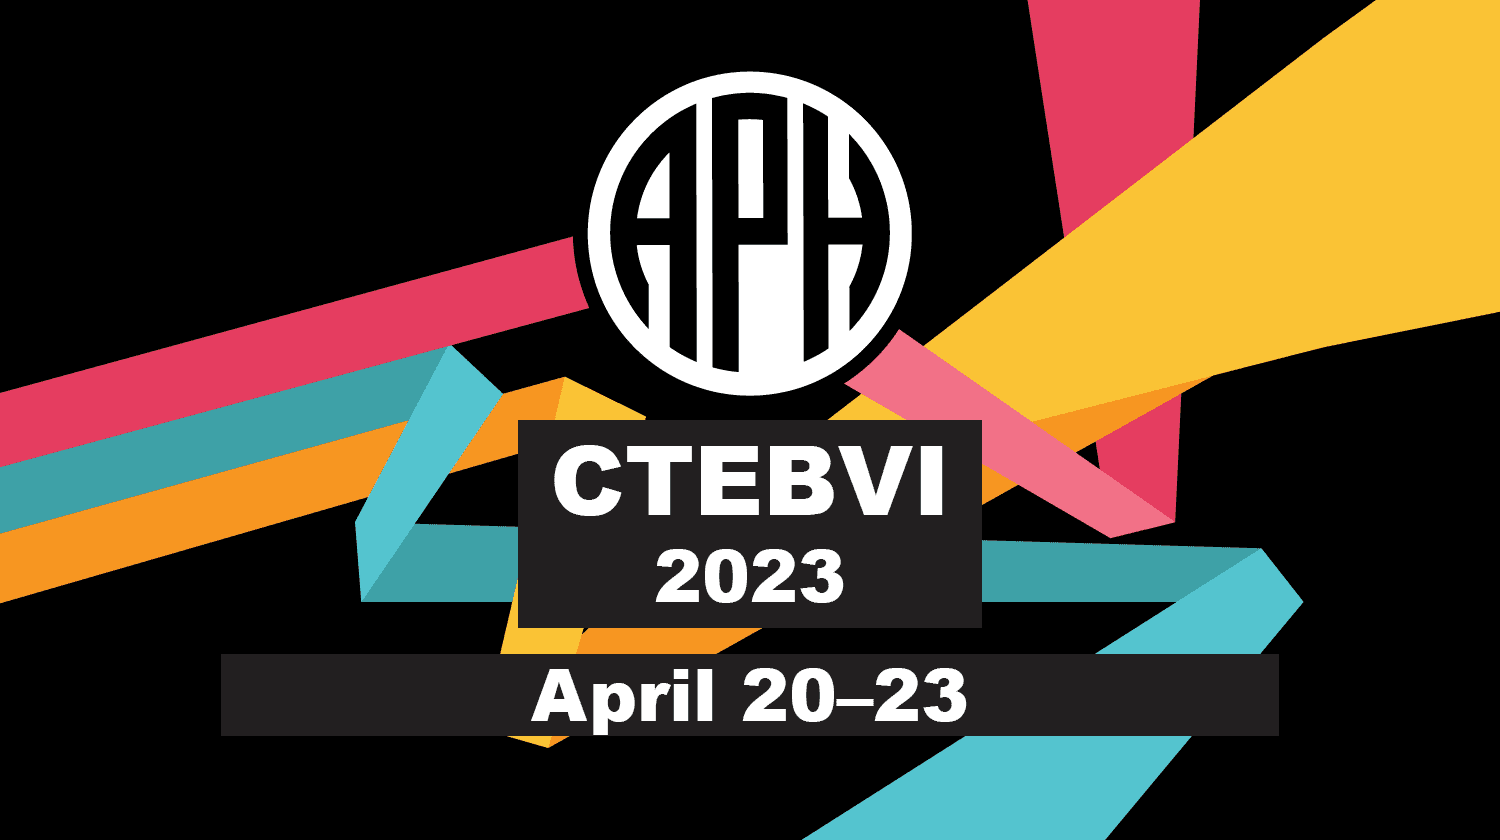 APH event banner. Three parallel bars in the APH brand colors of pomegranate, teal, and gold diverge and zigzag dynamically behind the APH logo. Text reads: CTEBVI 2023, April 20 - 23.